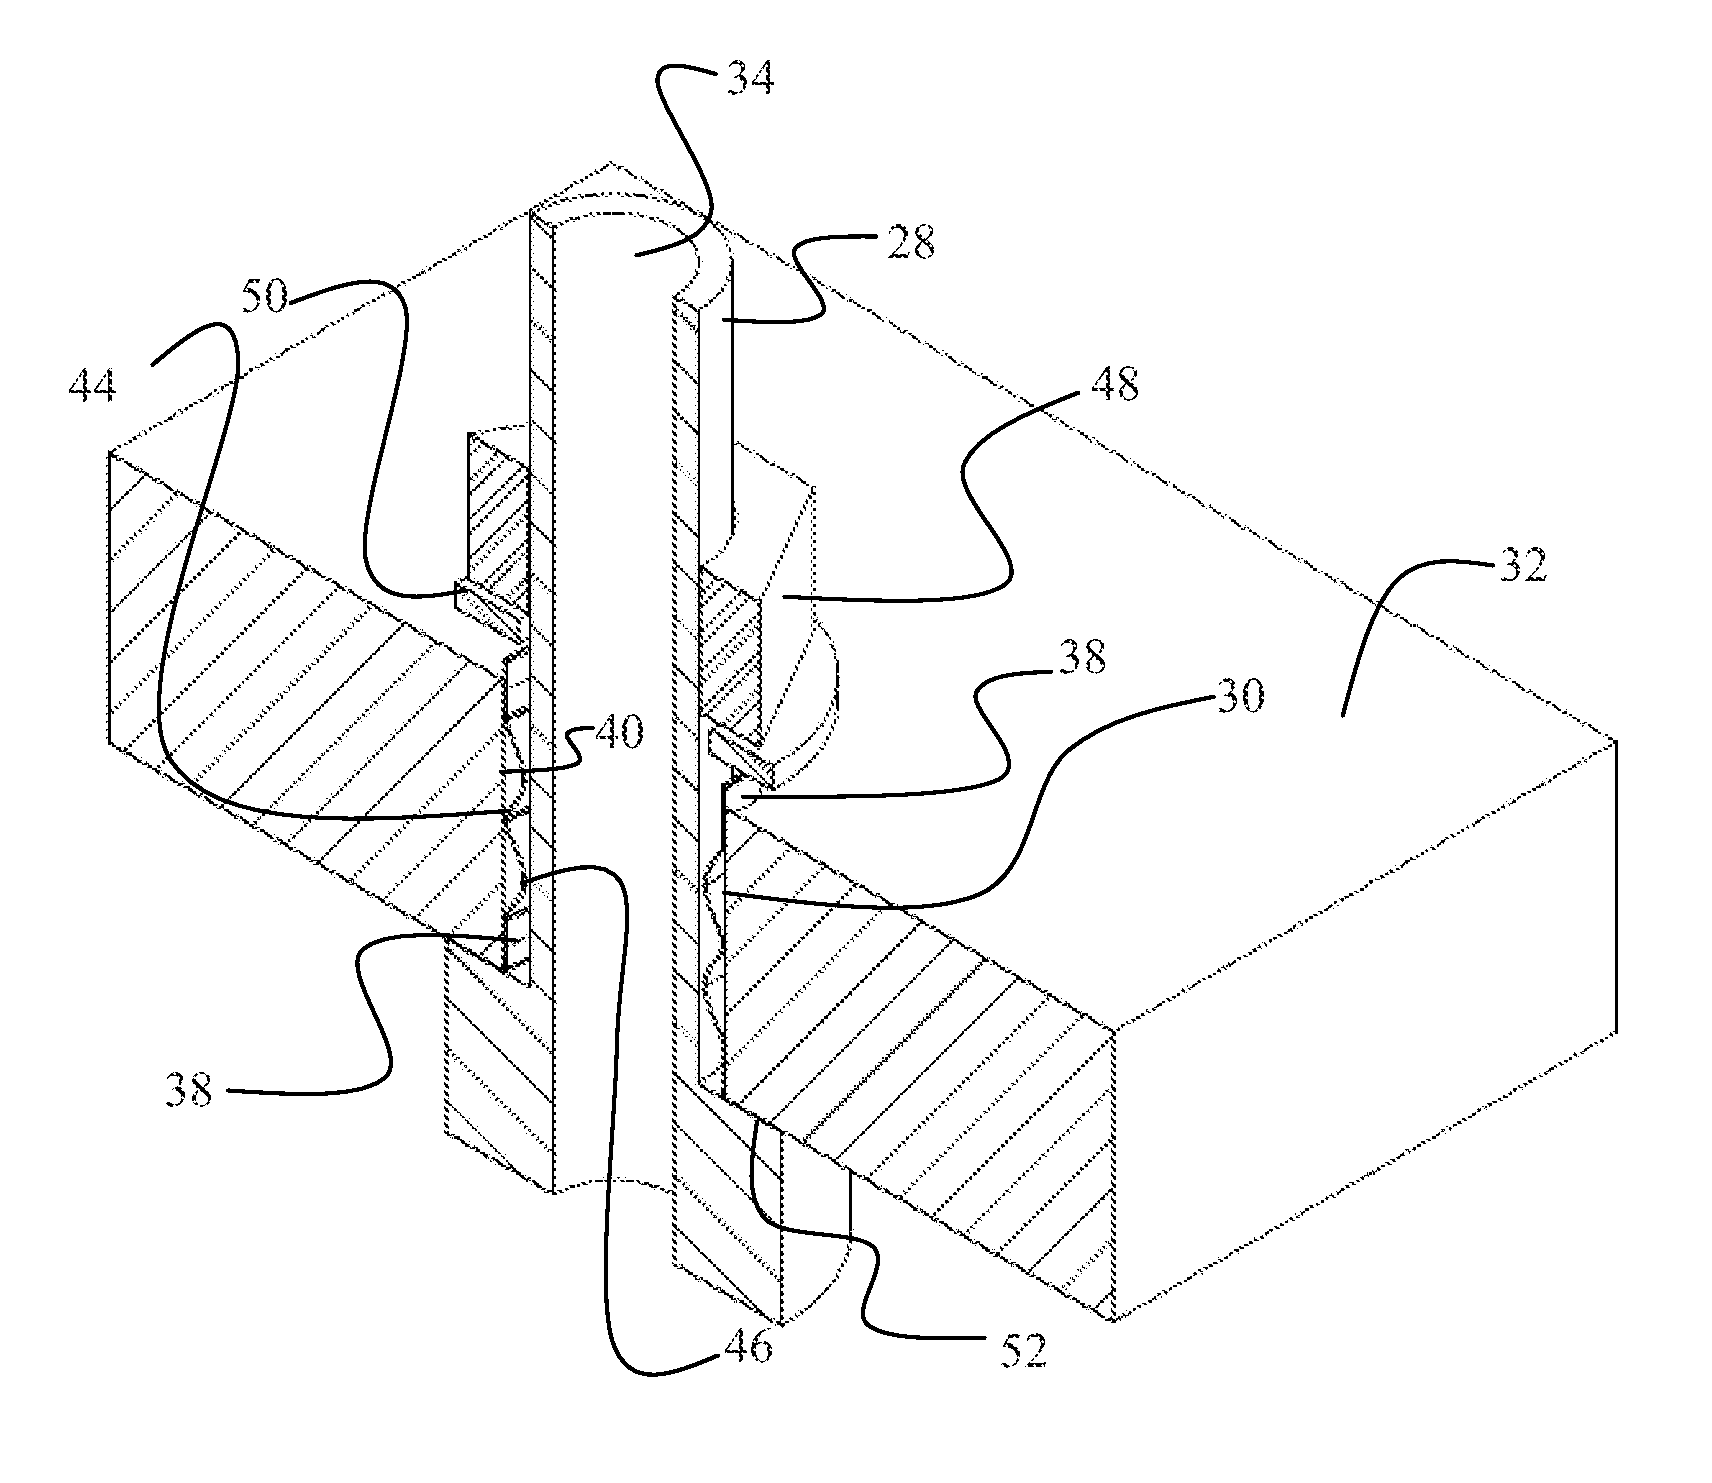 Electrically conductive bushing connection to structure for current path